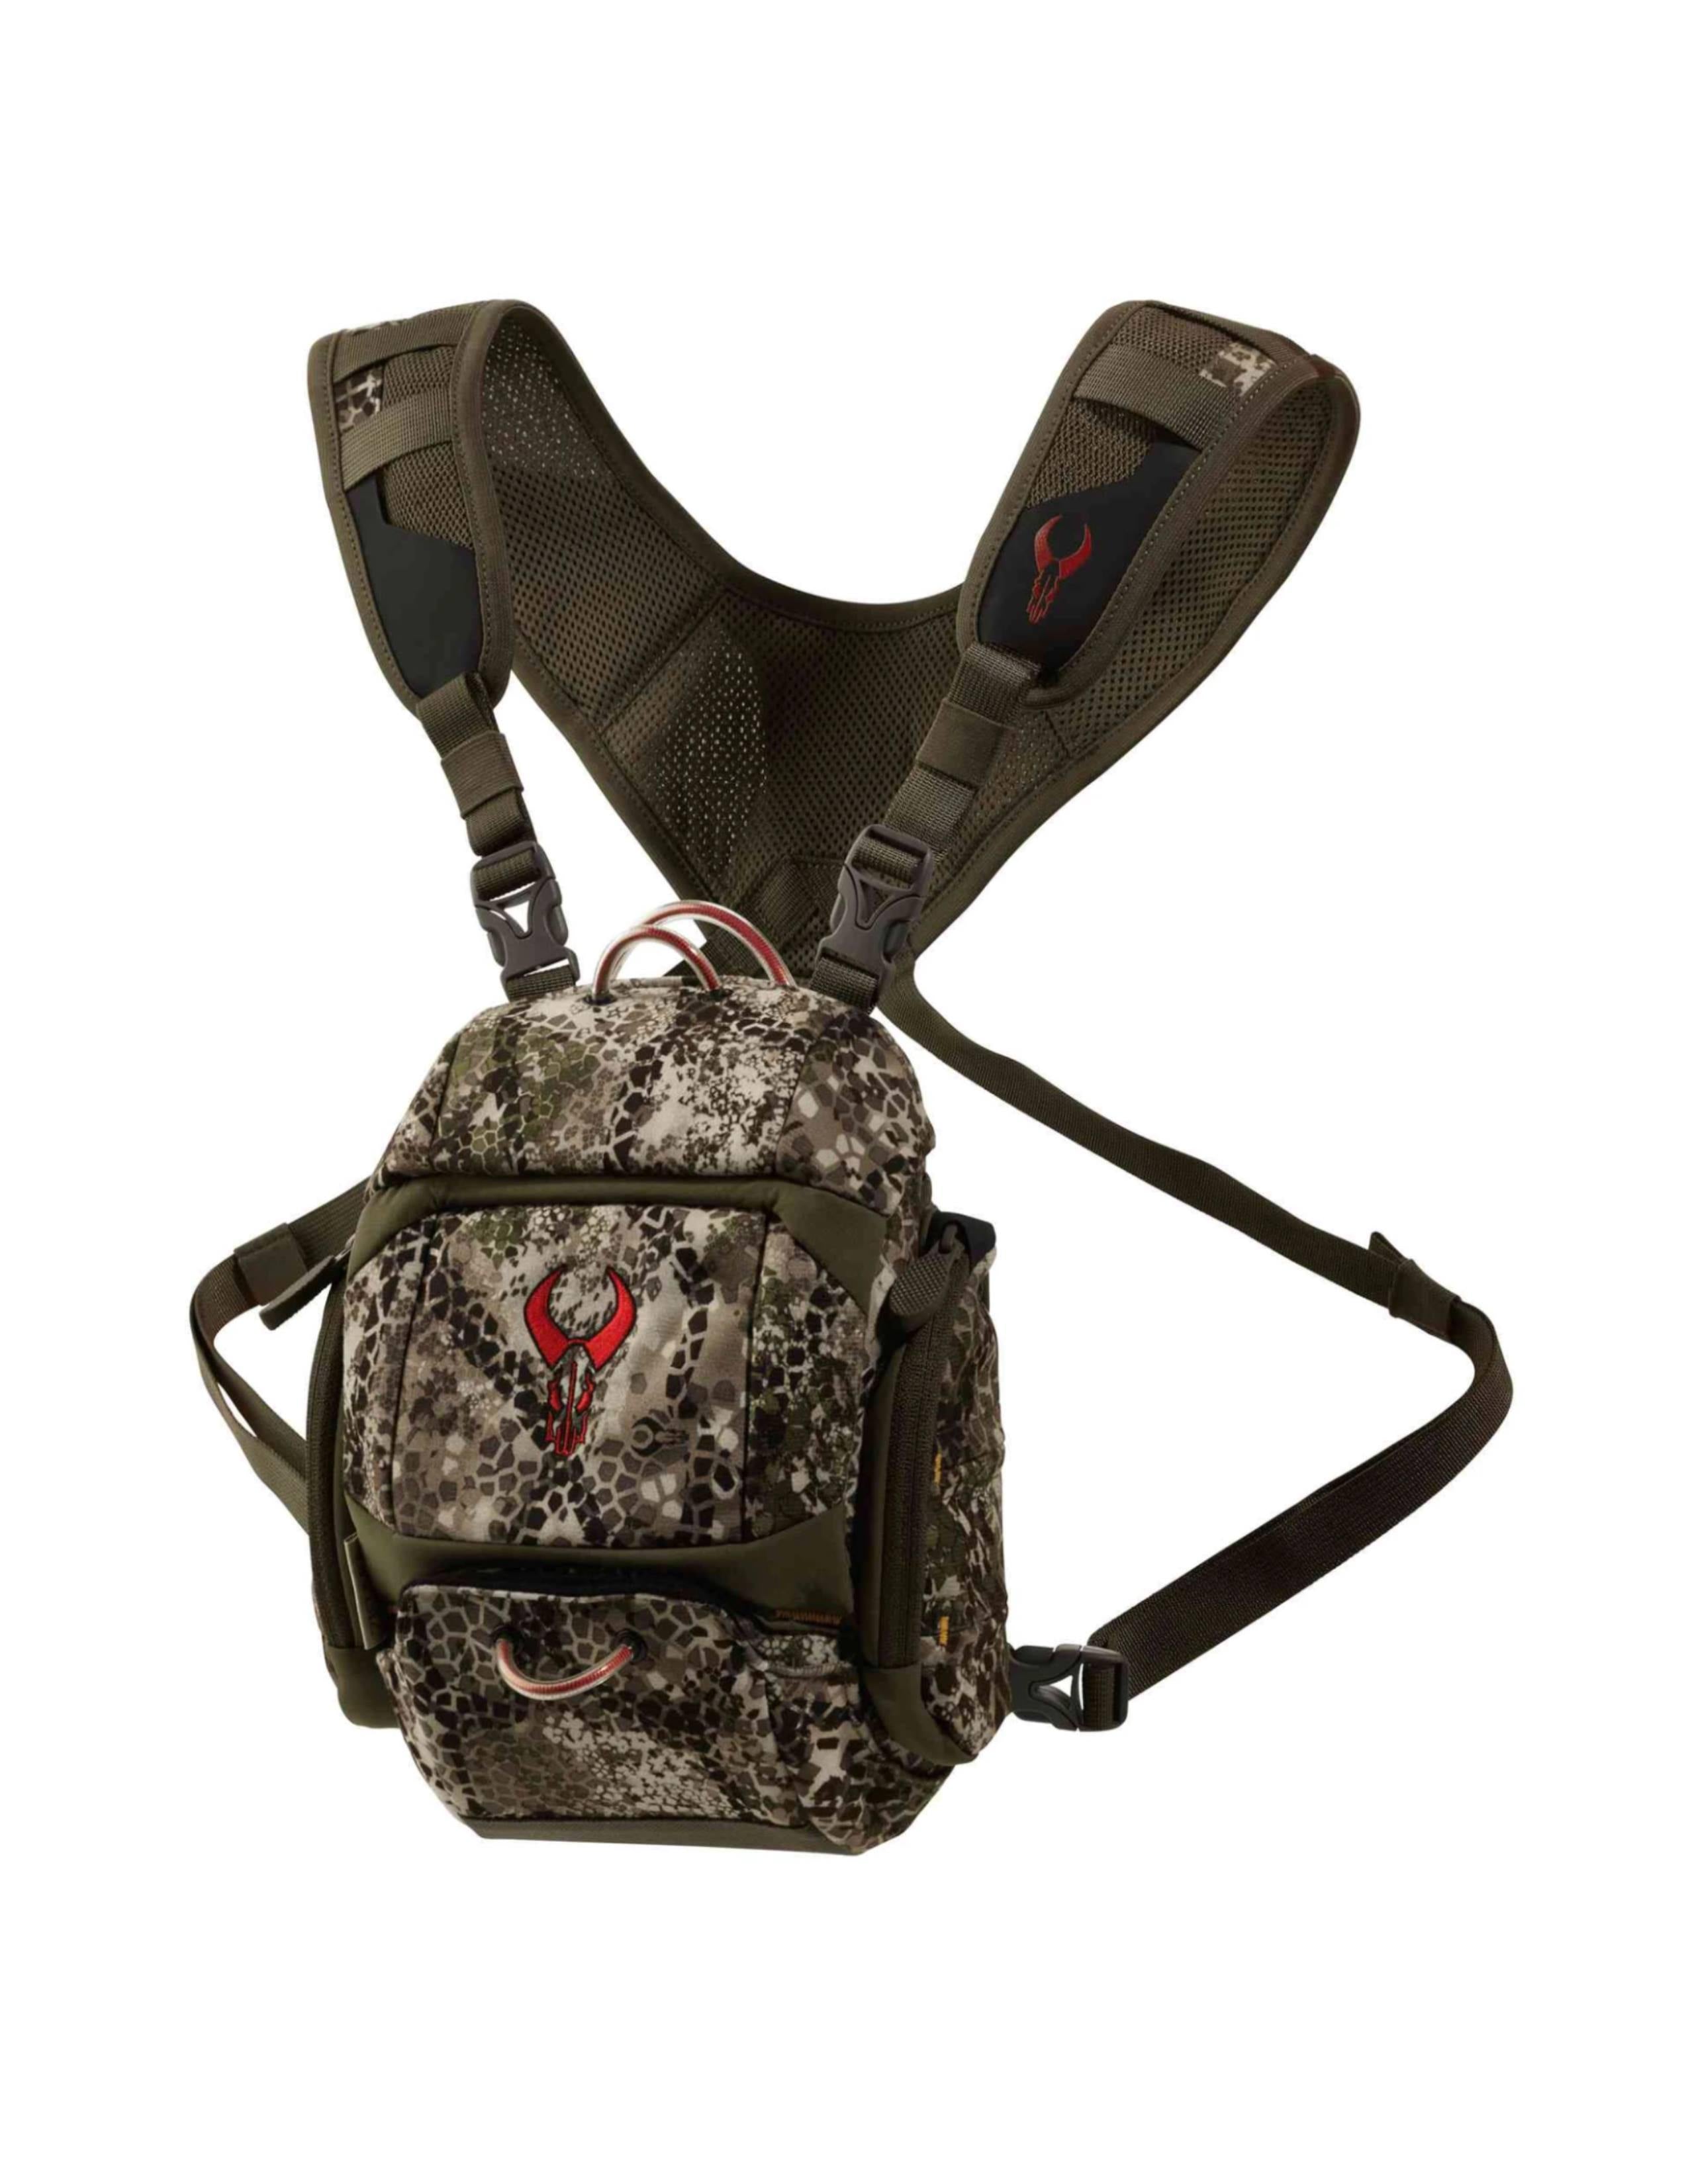 Badlands Bino XR - Leapfrog Outdoor Sports and Apparel